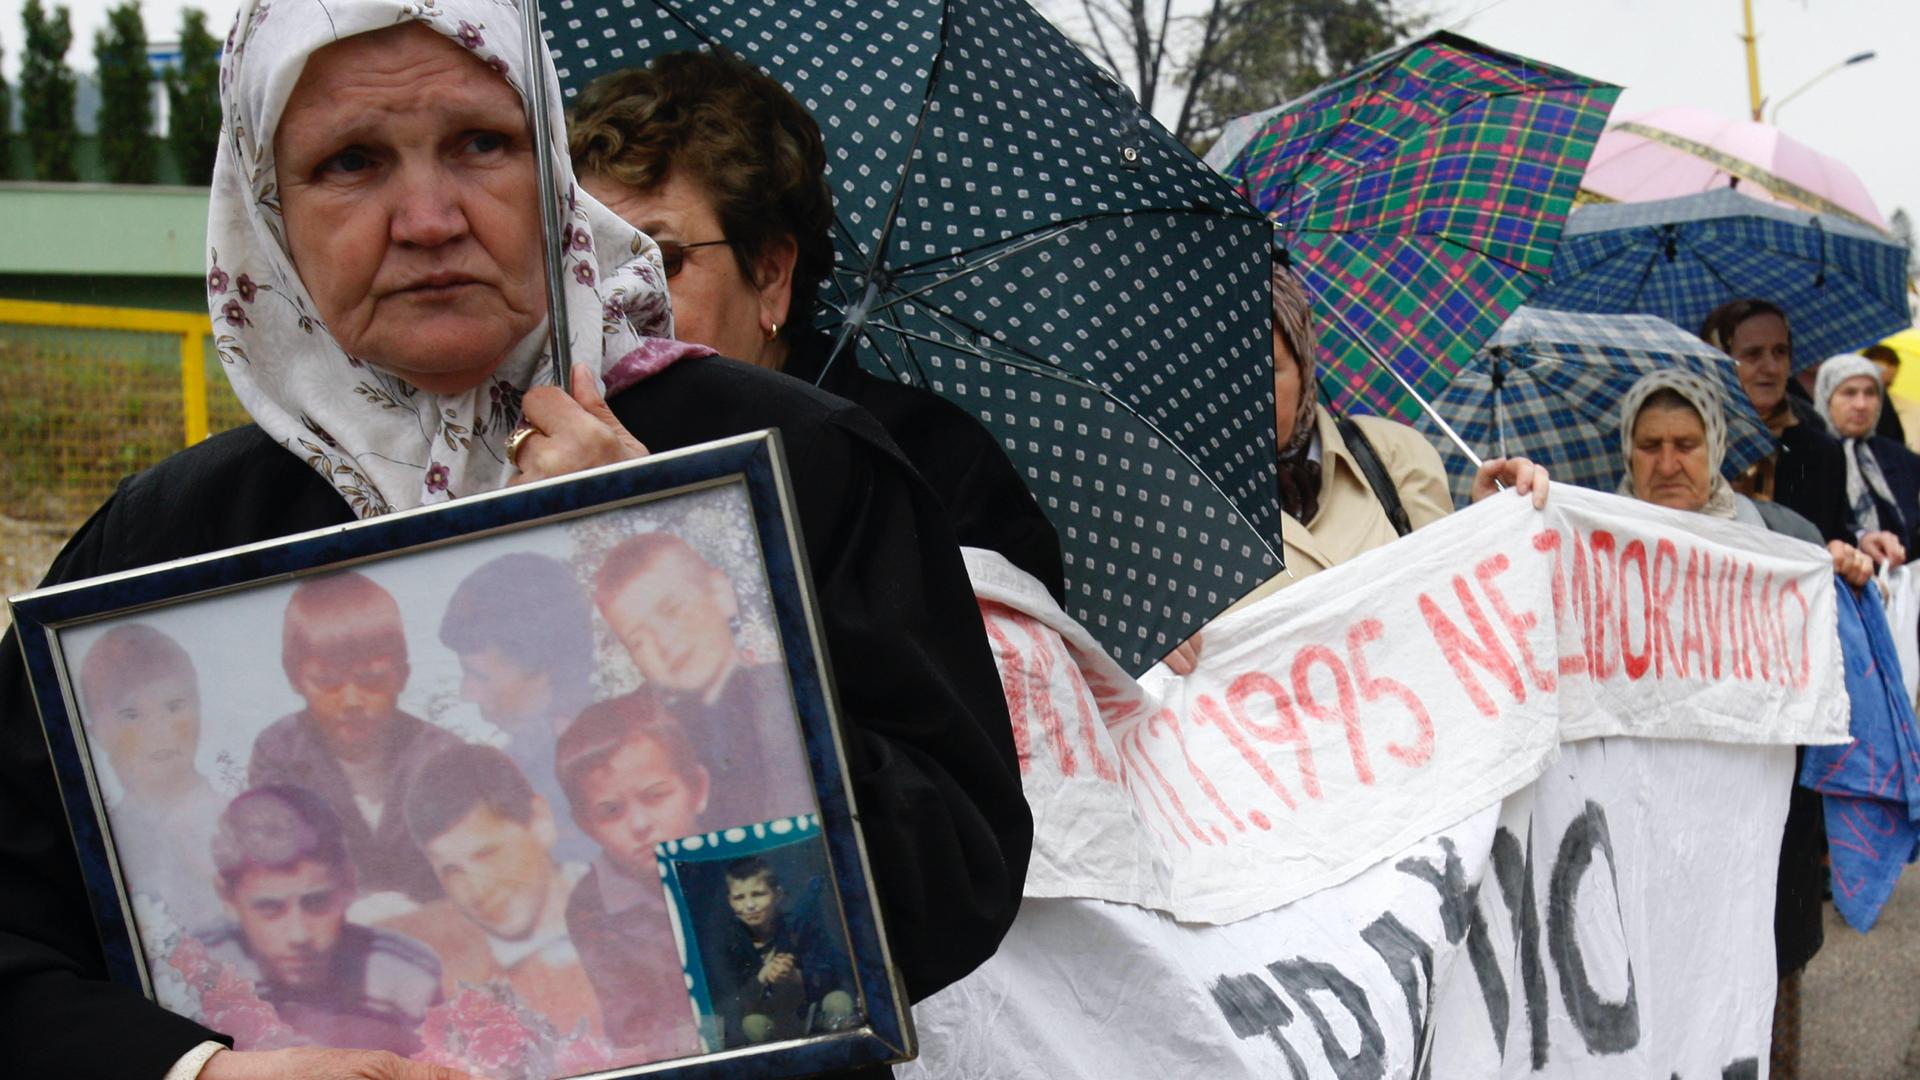 Bosnian Muslim women, and survivors of the Srebrenica massacre carry photos of relatives and display a banner with names of missing relatives, during a peaceful protest walk, in Tuzla, 72 kilometers north of Bosnian capital of Sarajevo, April 12, 2010. Su